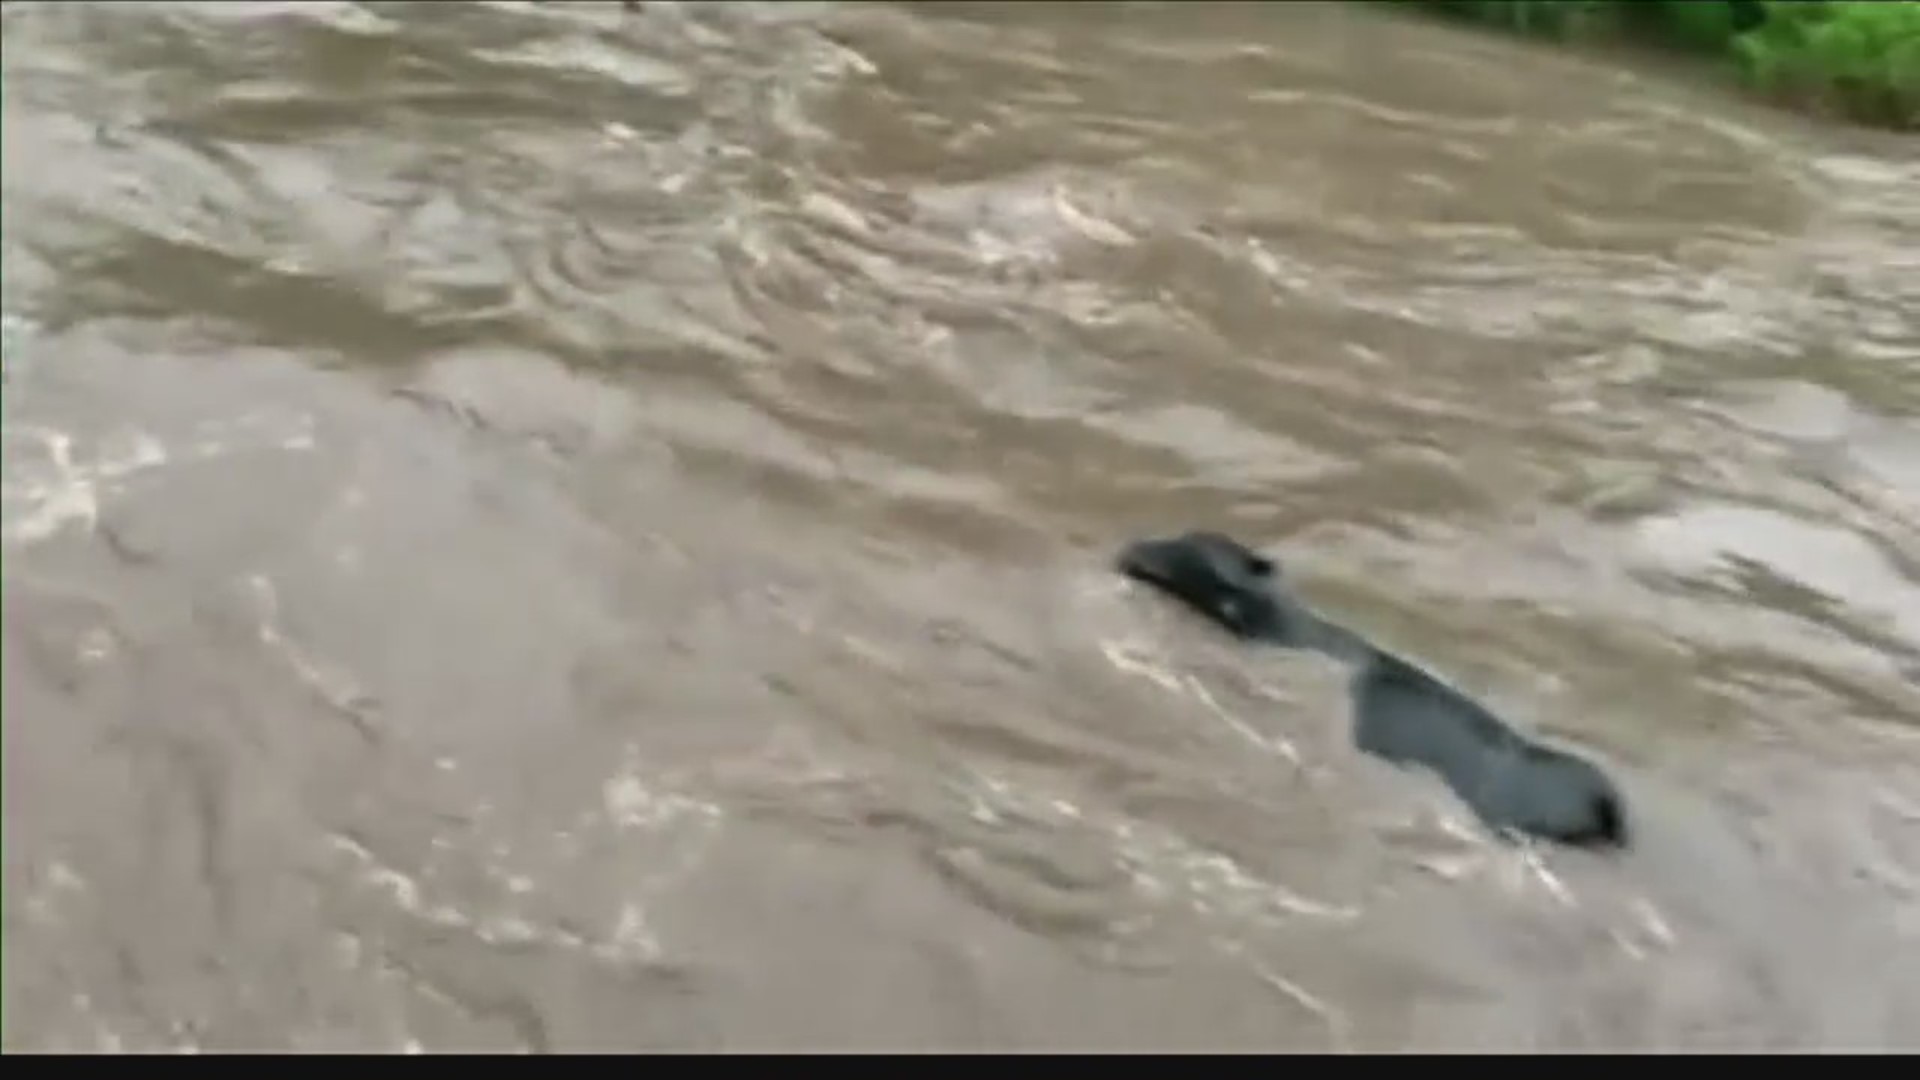 Flash flooding in Minnesota forces a heard of cows downstream, the high water sweeping them away from a farm.